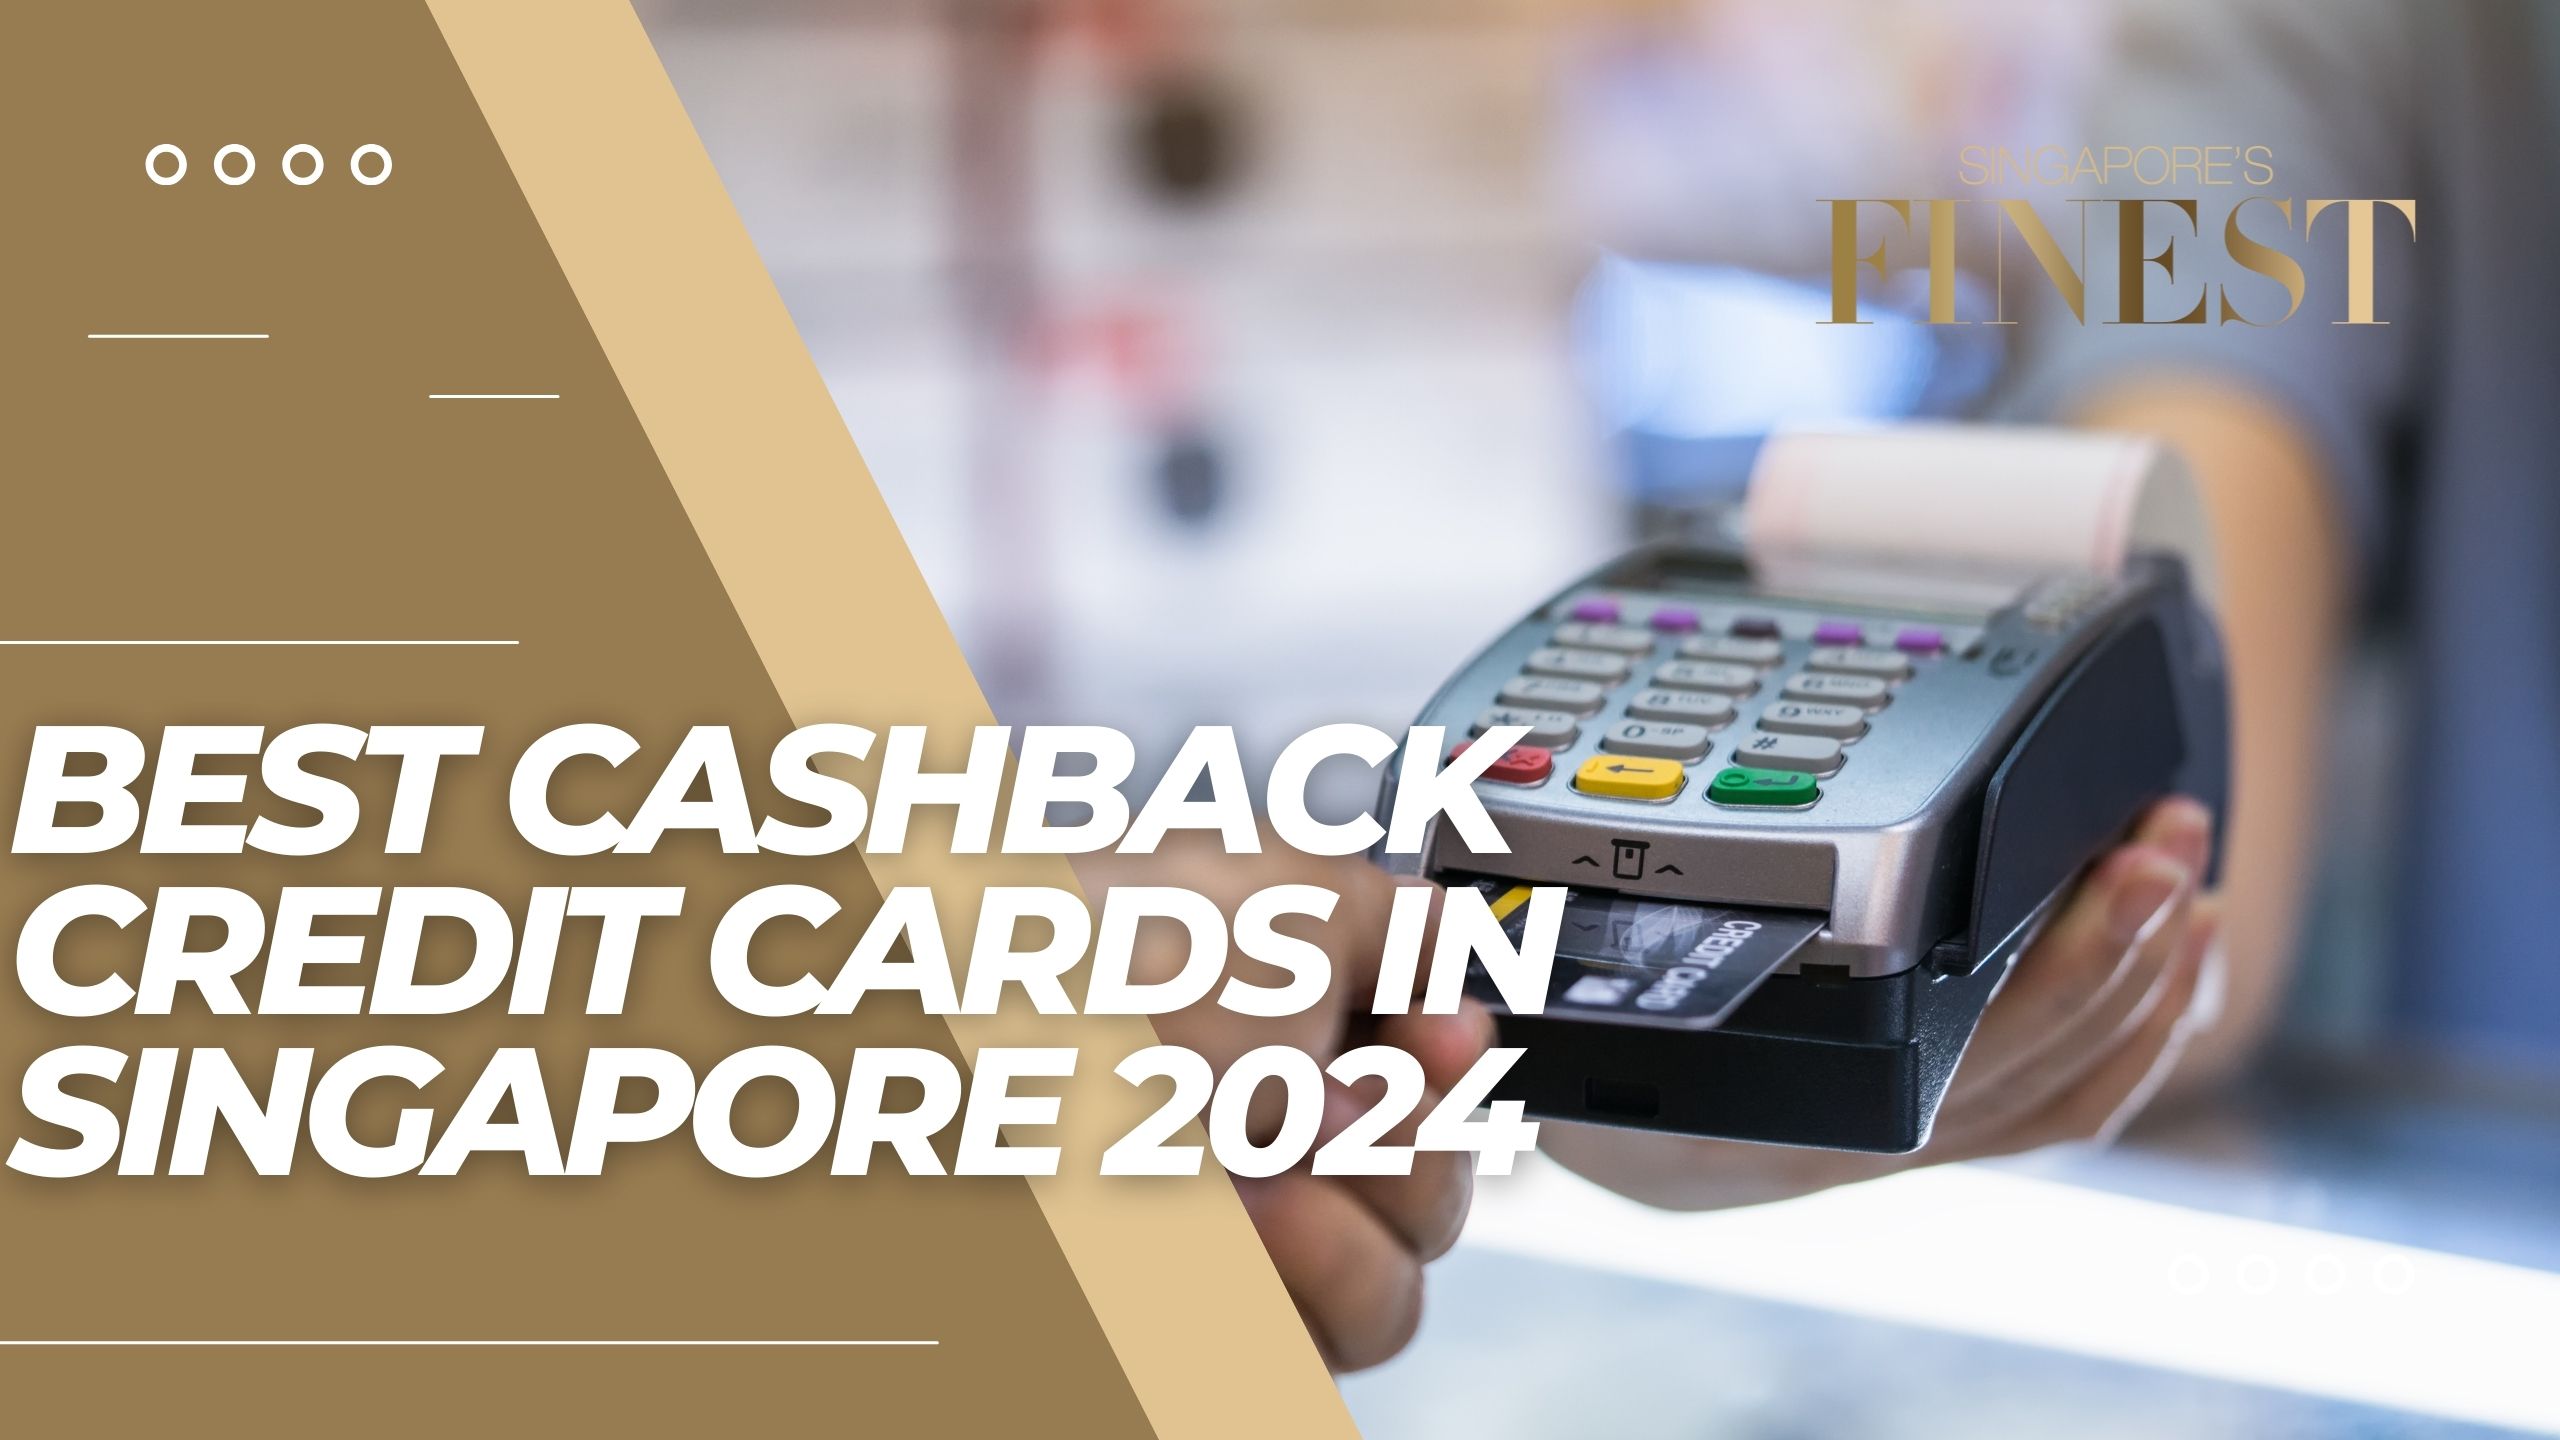 Best Cashback Credit Cards in Singapore 2024